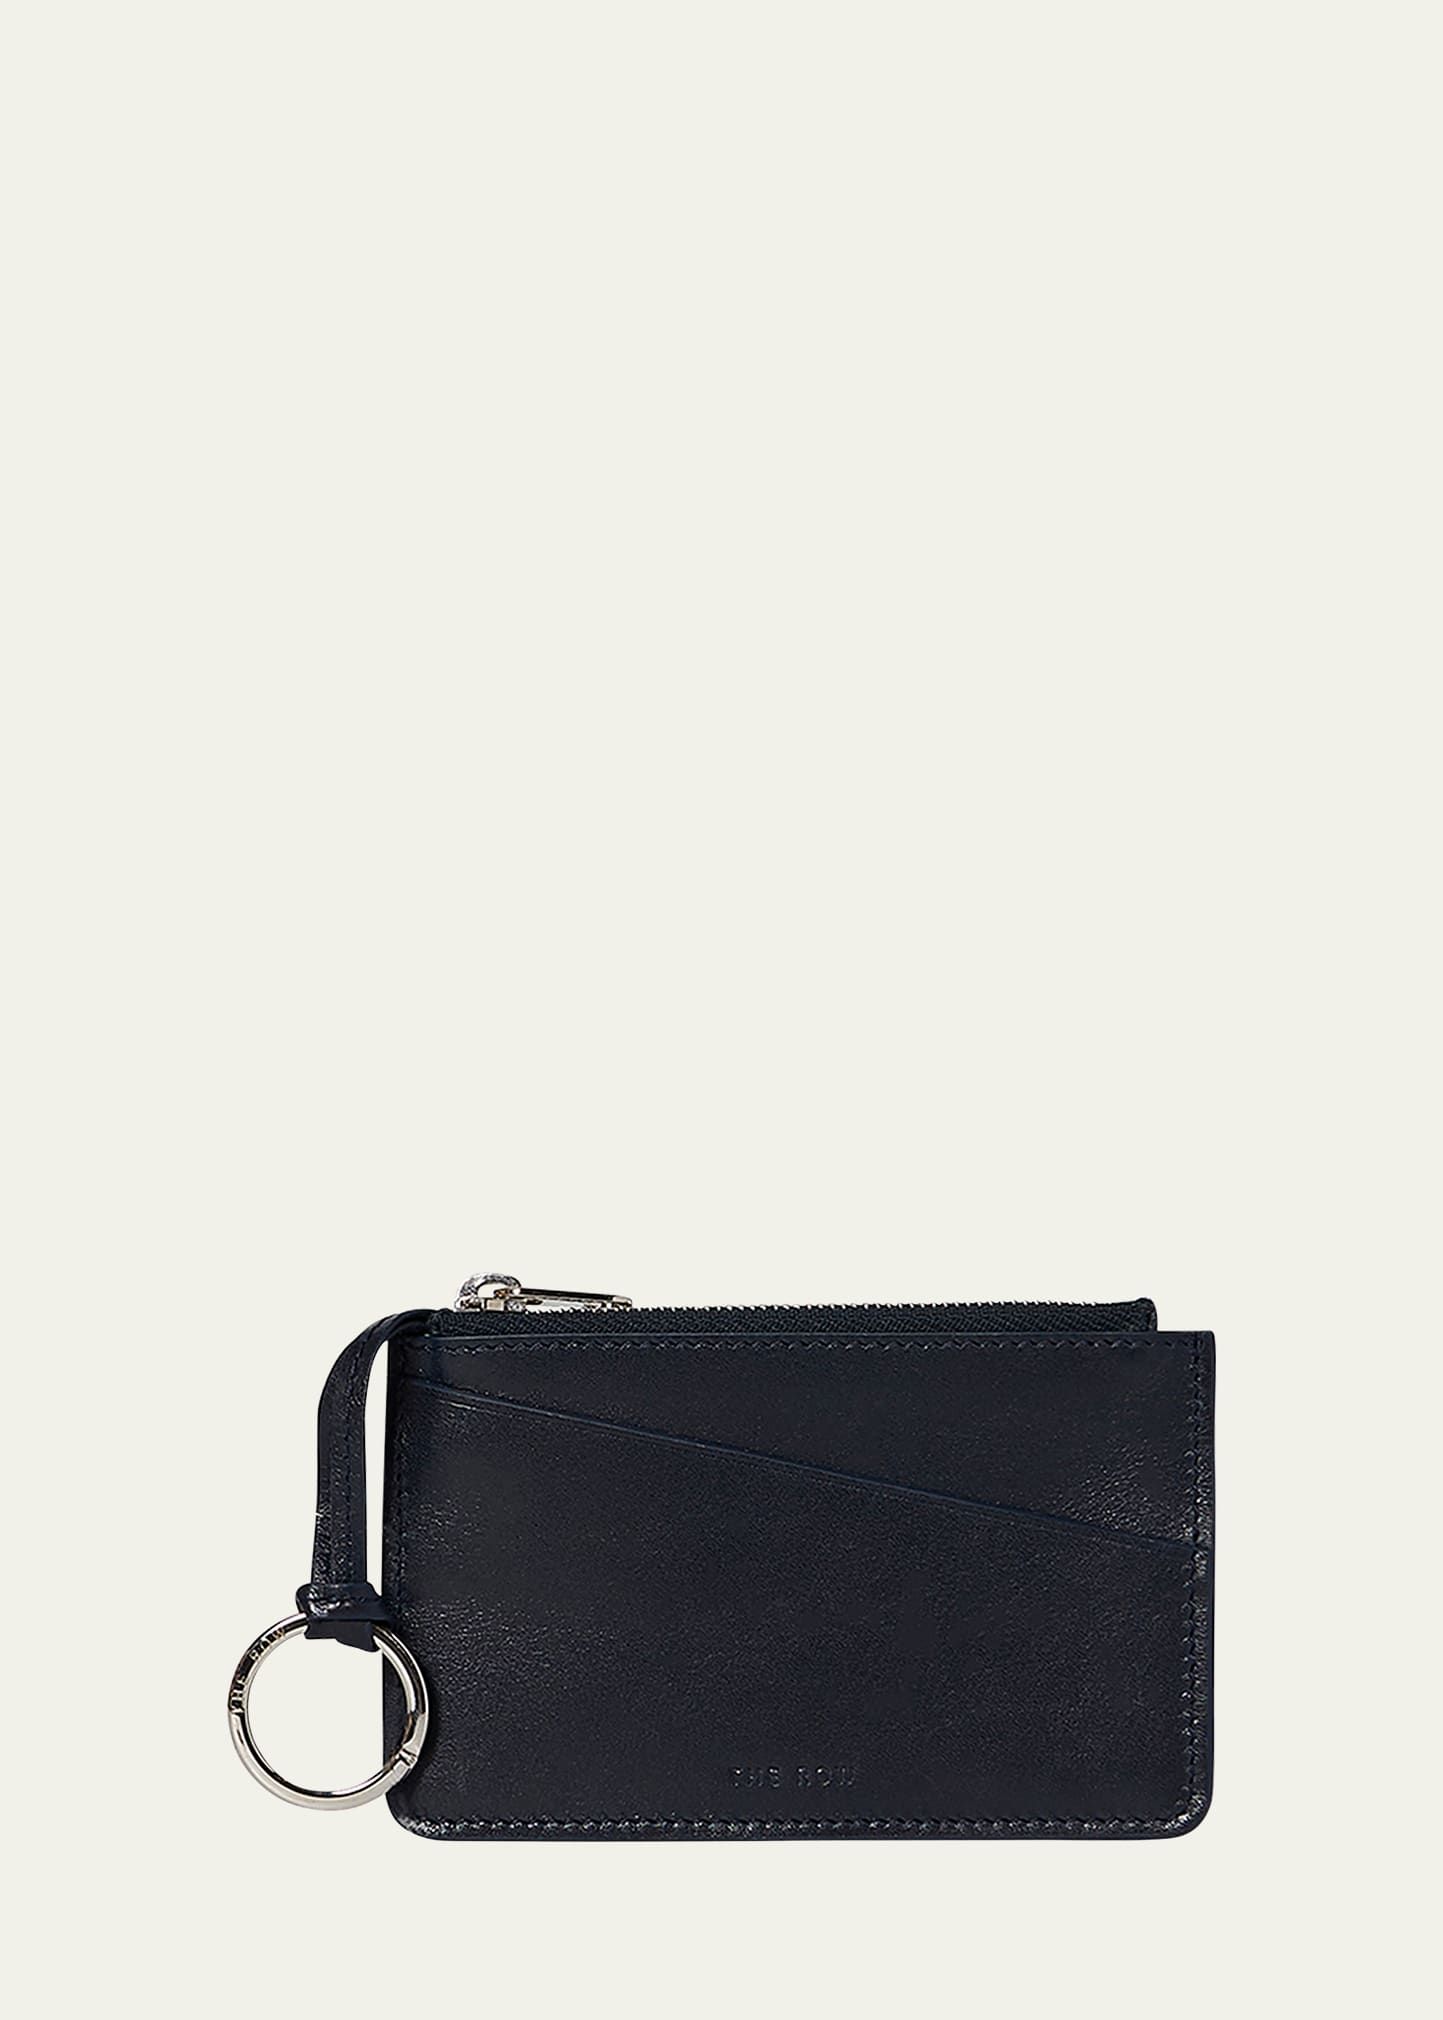 The Row Zip Wallet In Calf Leather In Blpl Black Pld